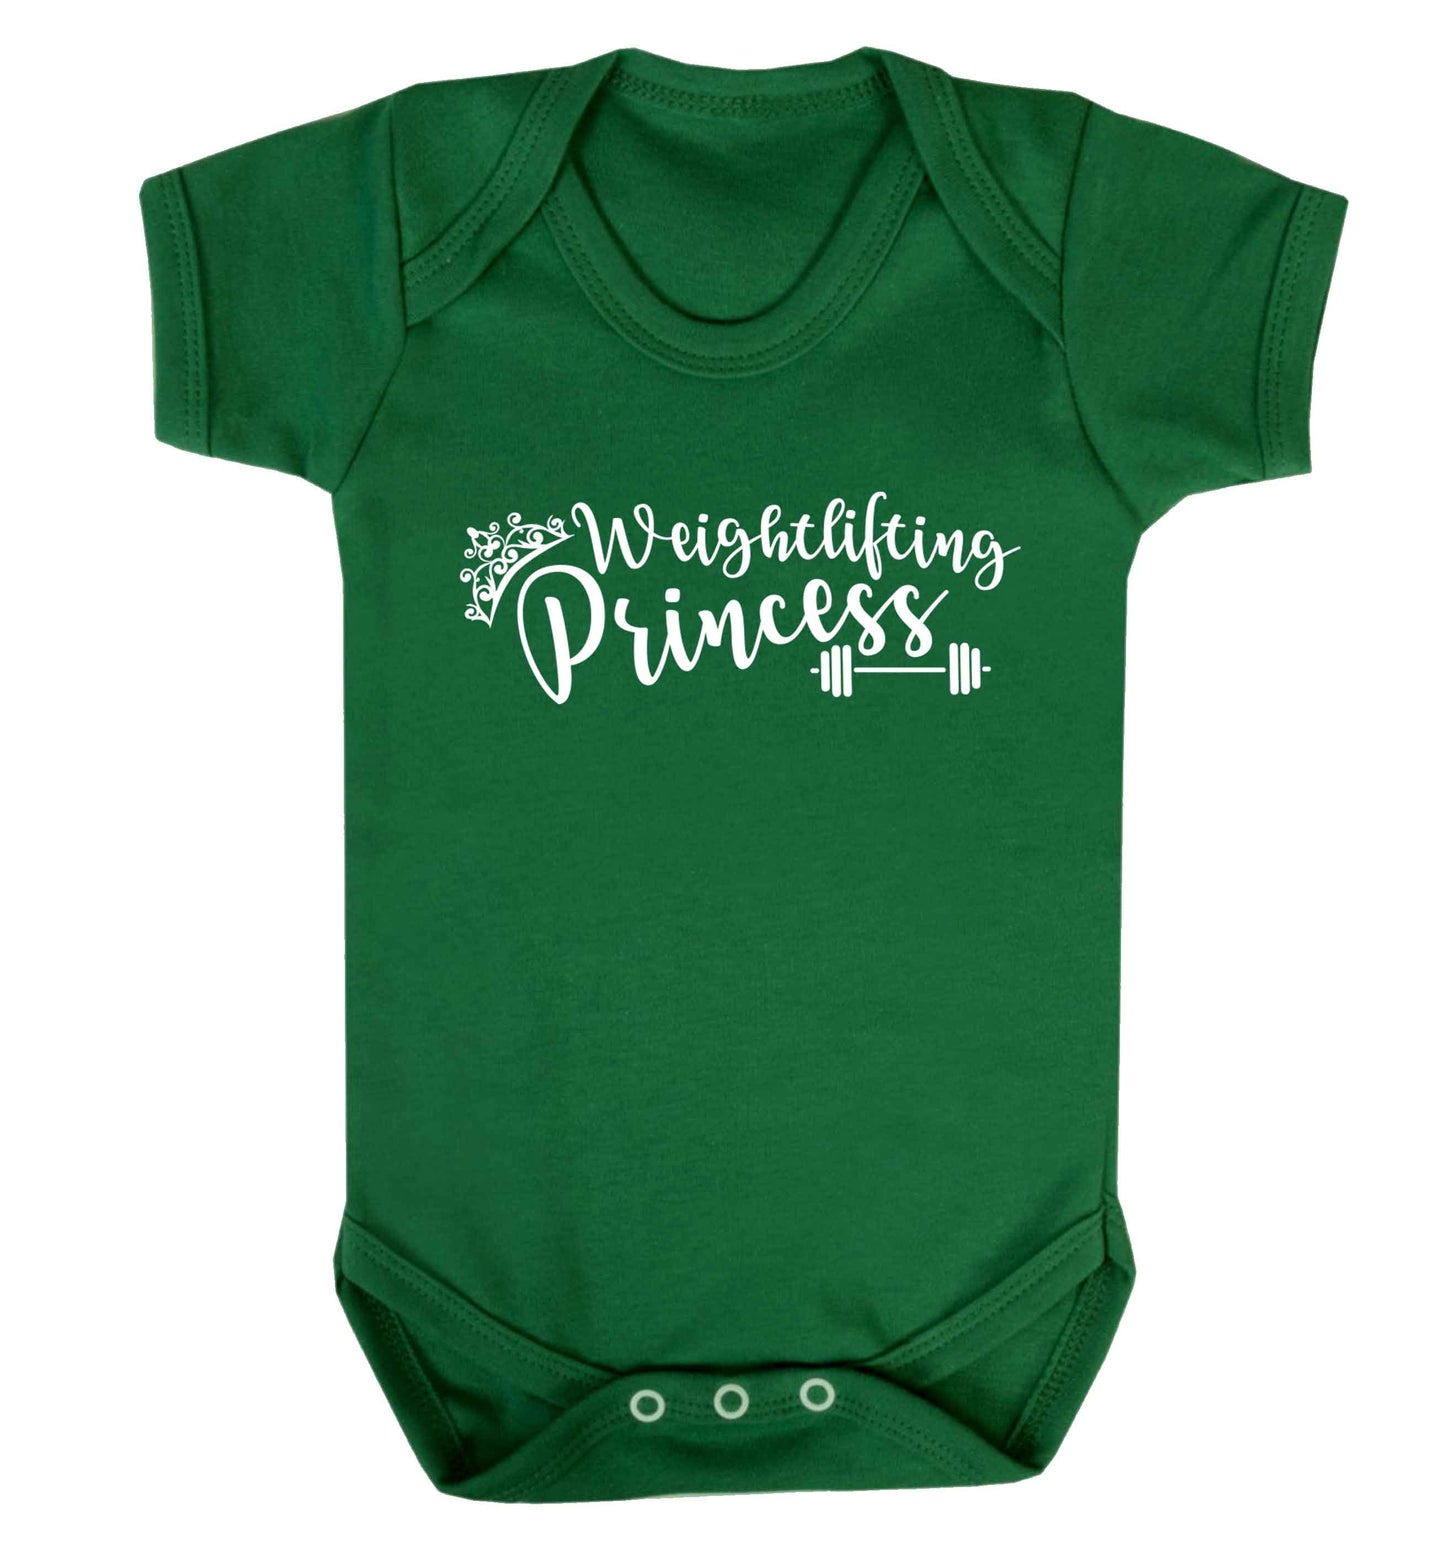 Weightlifting princess Baby Vest green 18-24 months